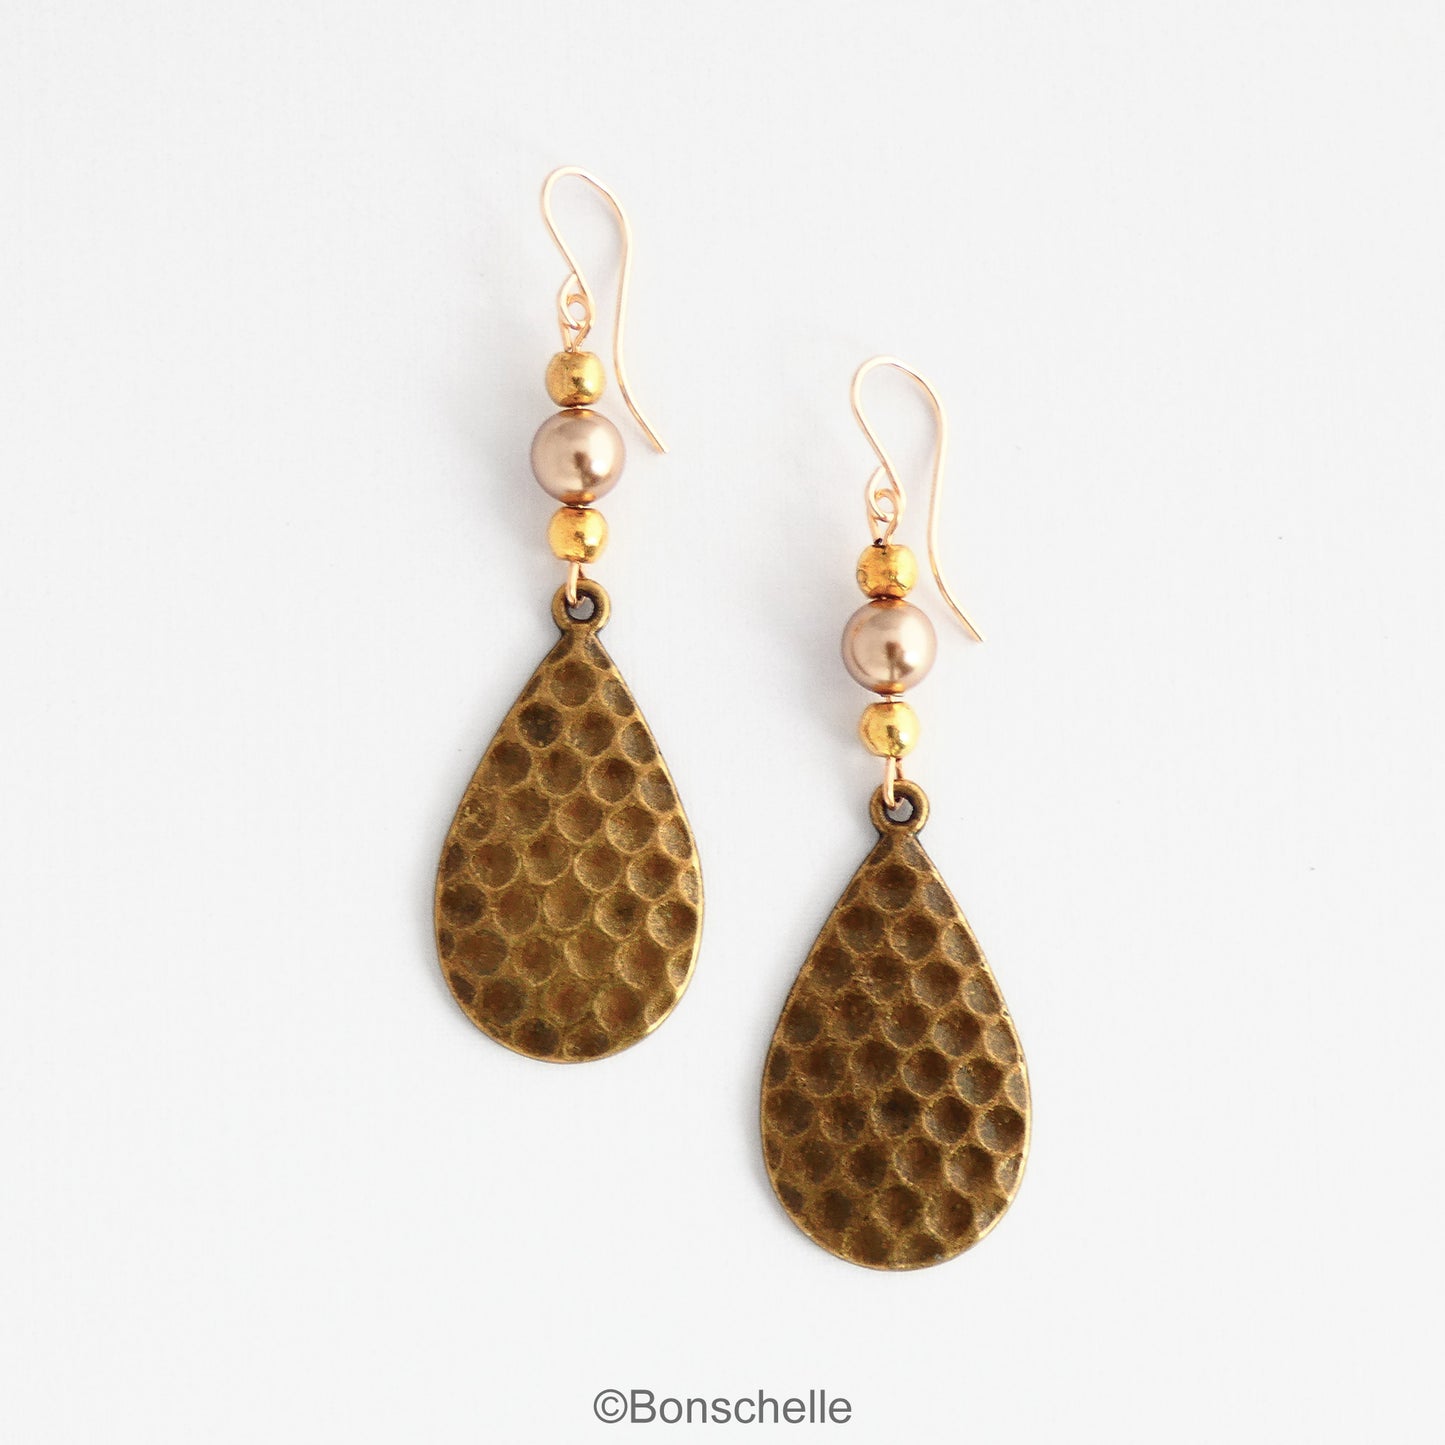 Antique bronze toned hammered metal teardrop earrings with bronze swarovski pearls, gold toned beads adn 14K gold filled earwires 